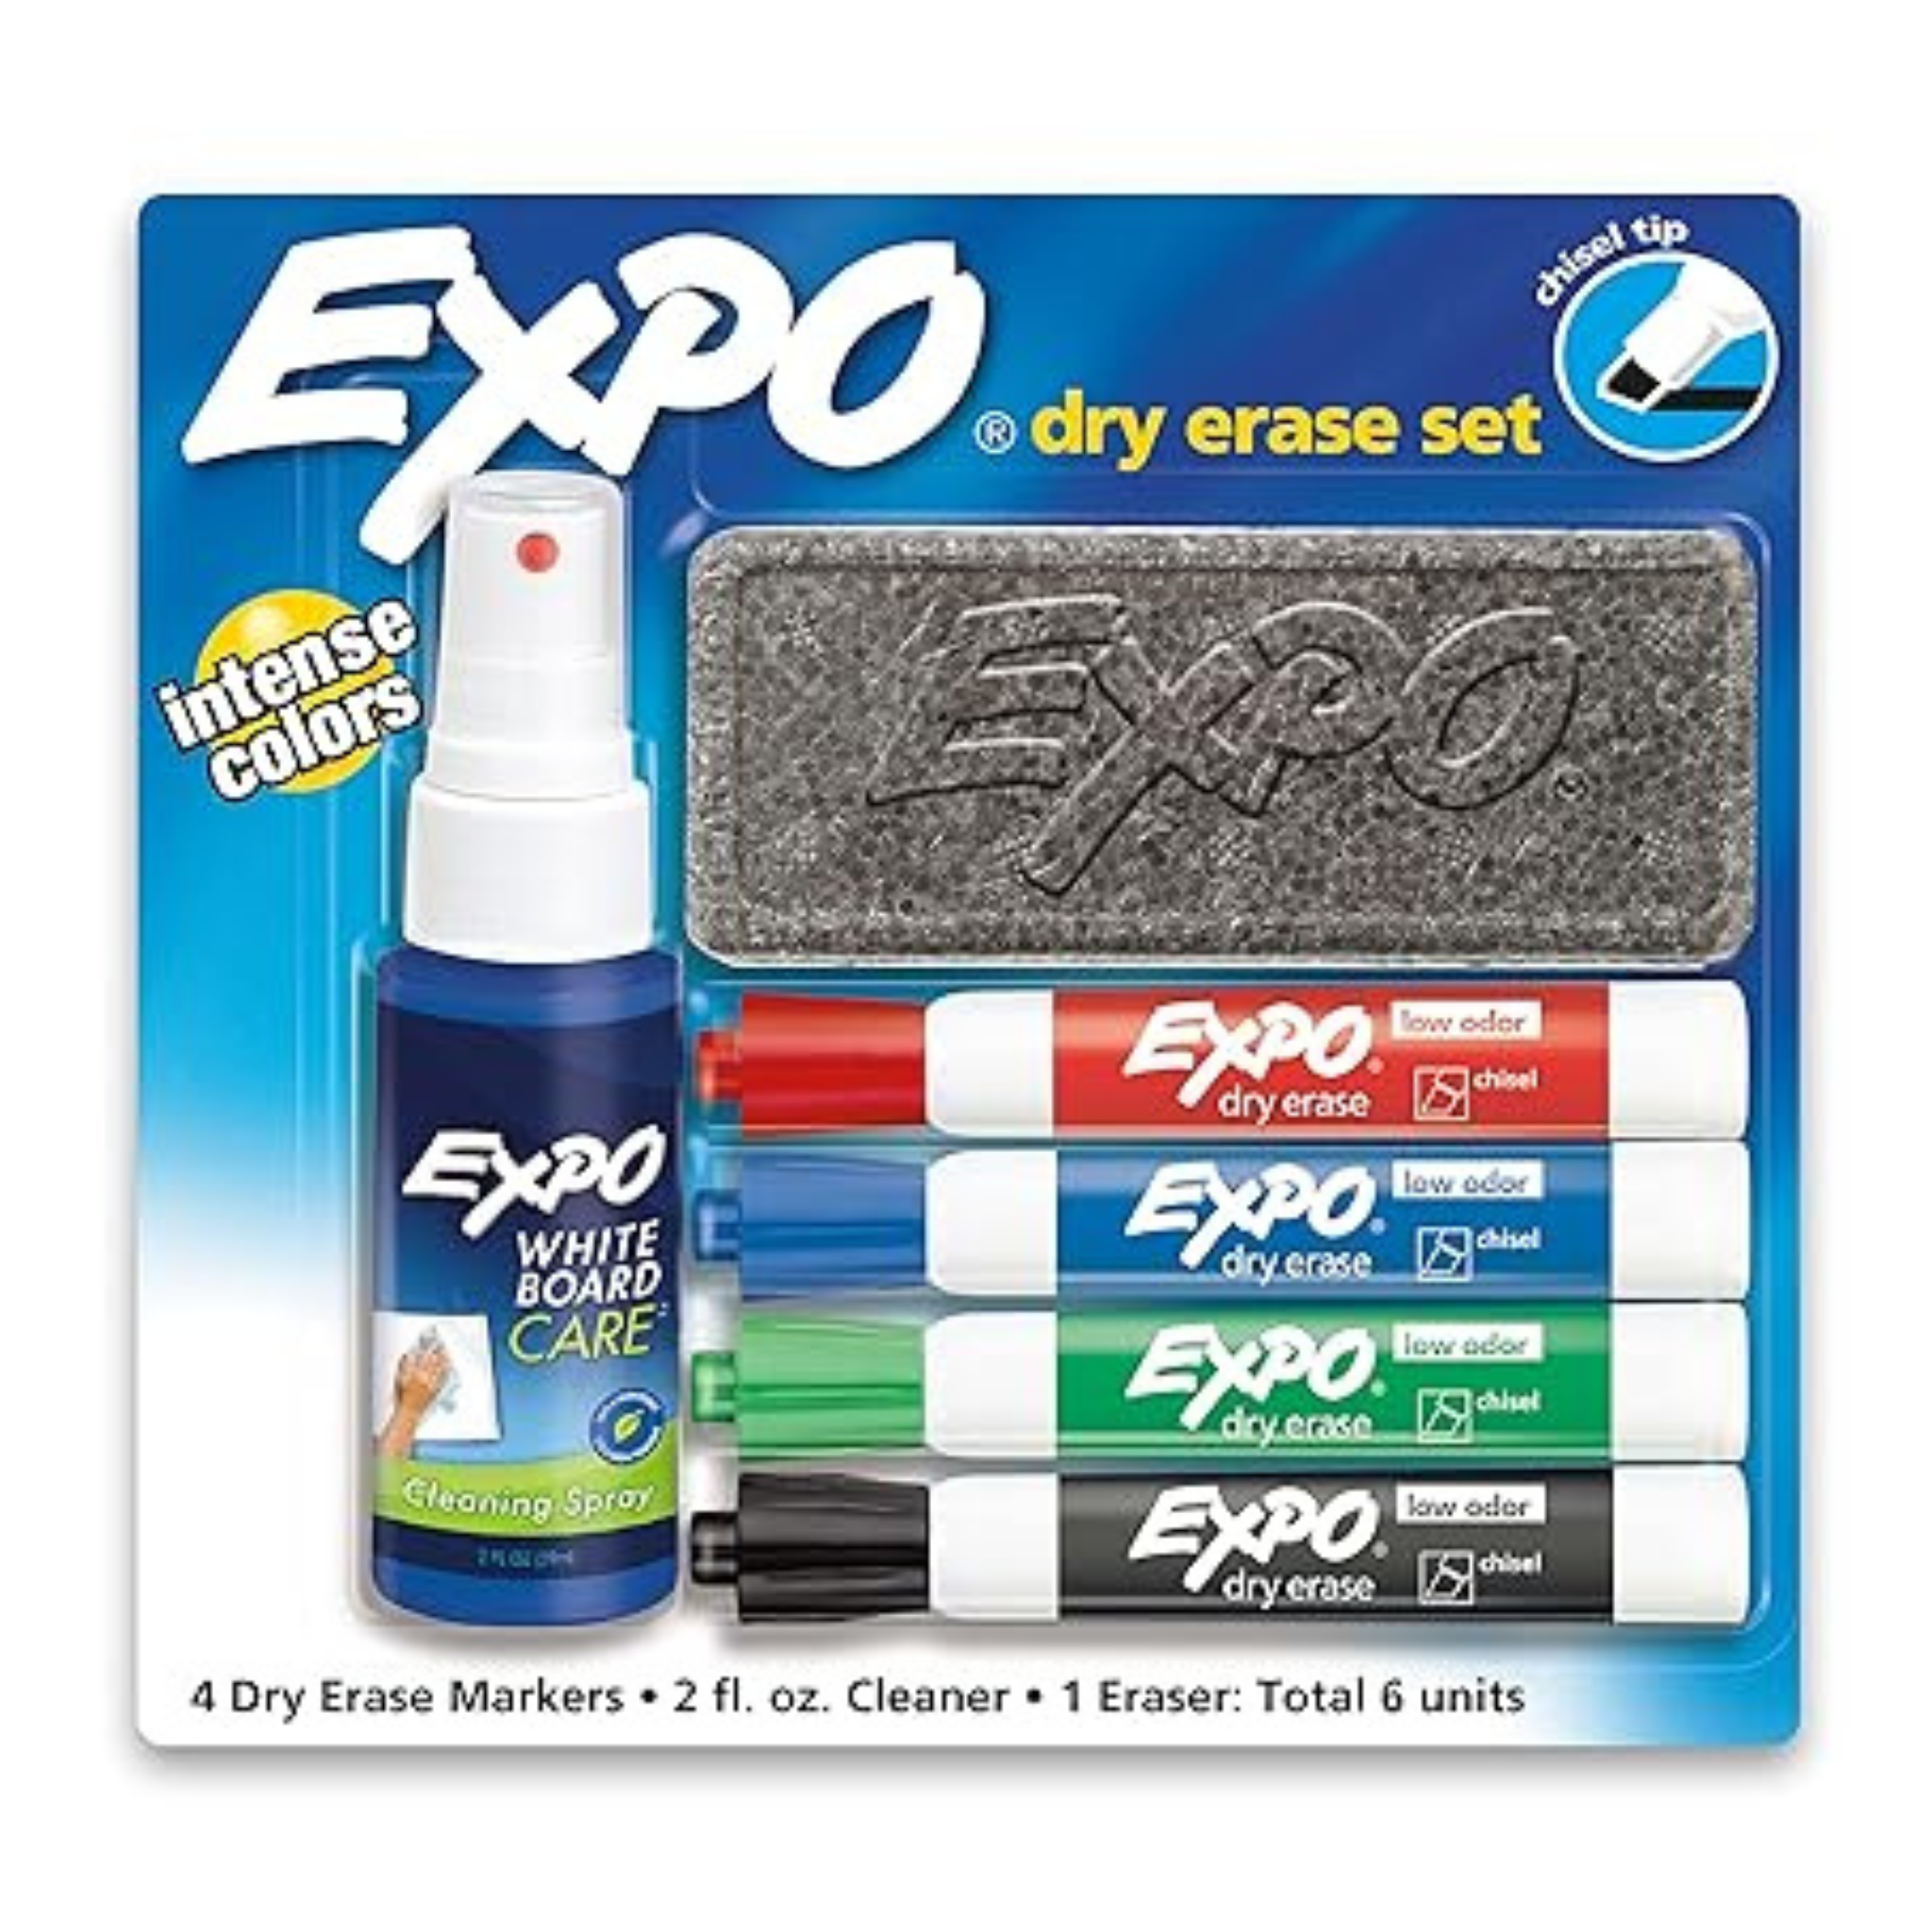 Expo Dry Erase Marker Set With White Board Eraser And Cleaner